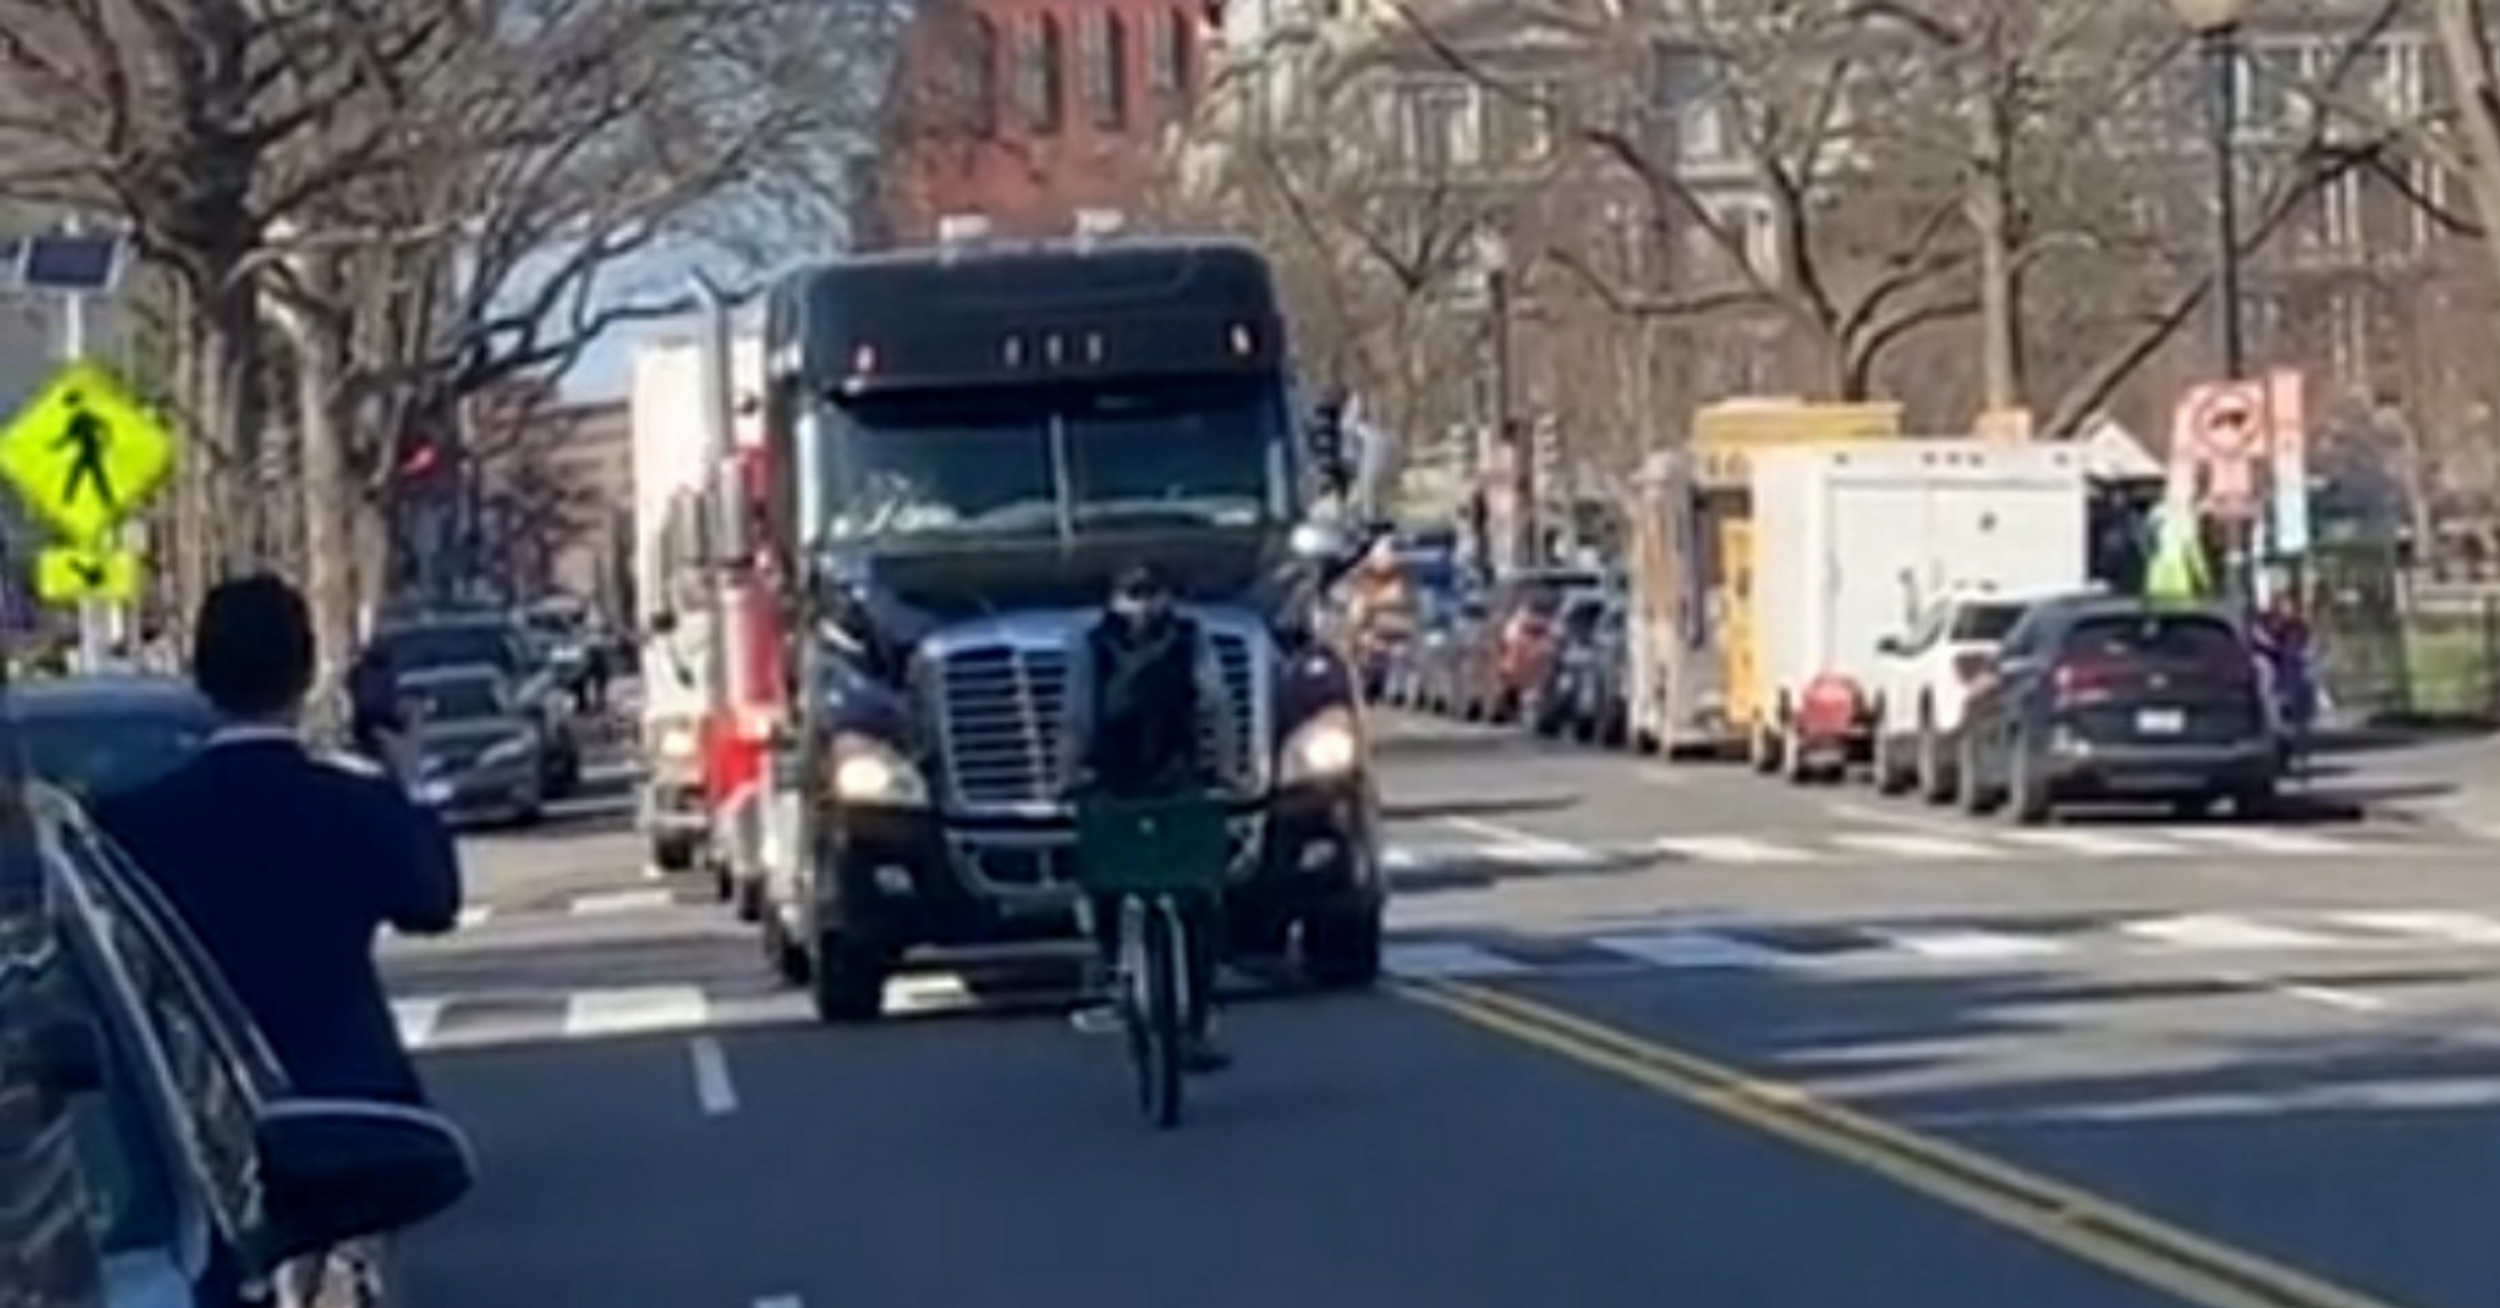 D.C. Bicyclist Becomes Internet Hero After Singlehandedly Holding Up 'Freedom Convoy' Truck Protest